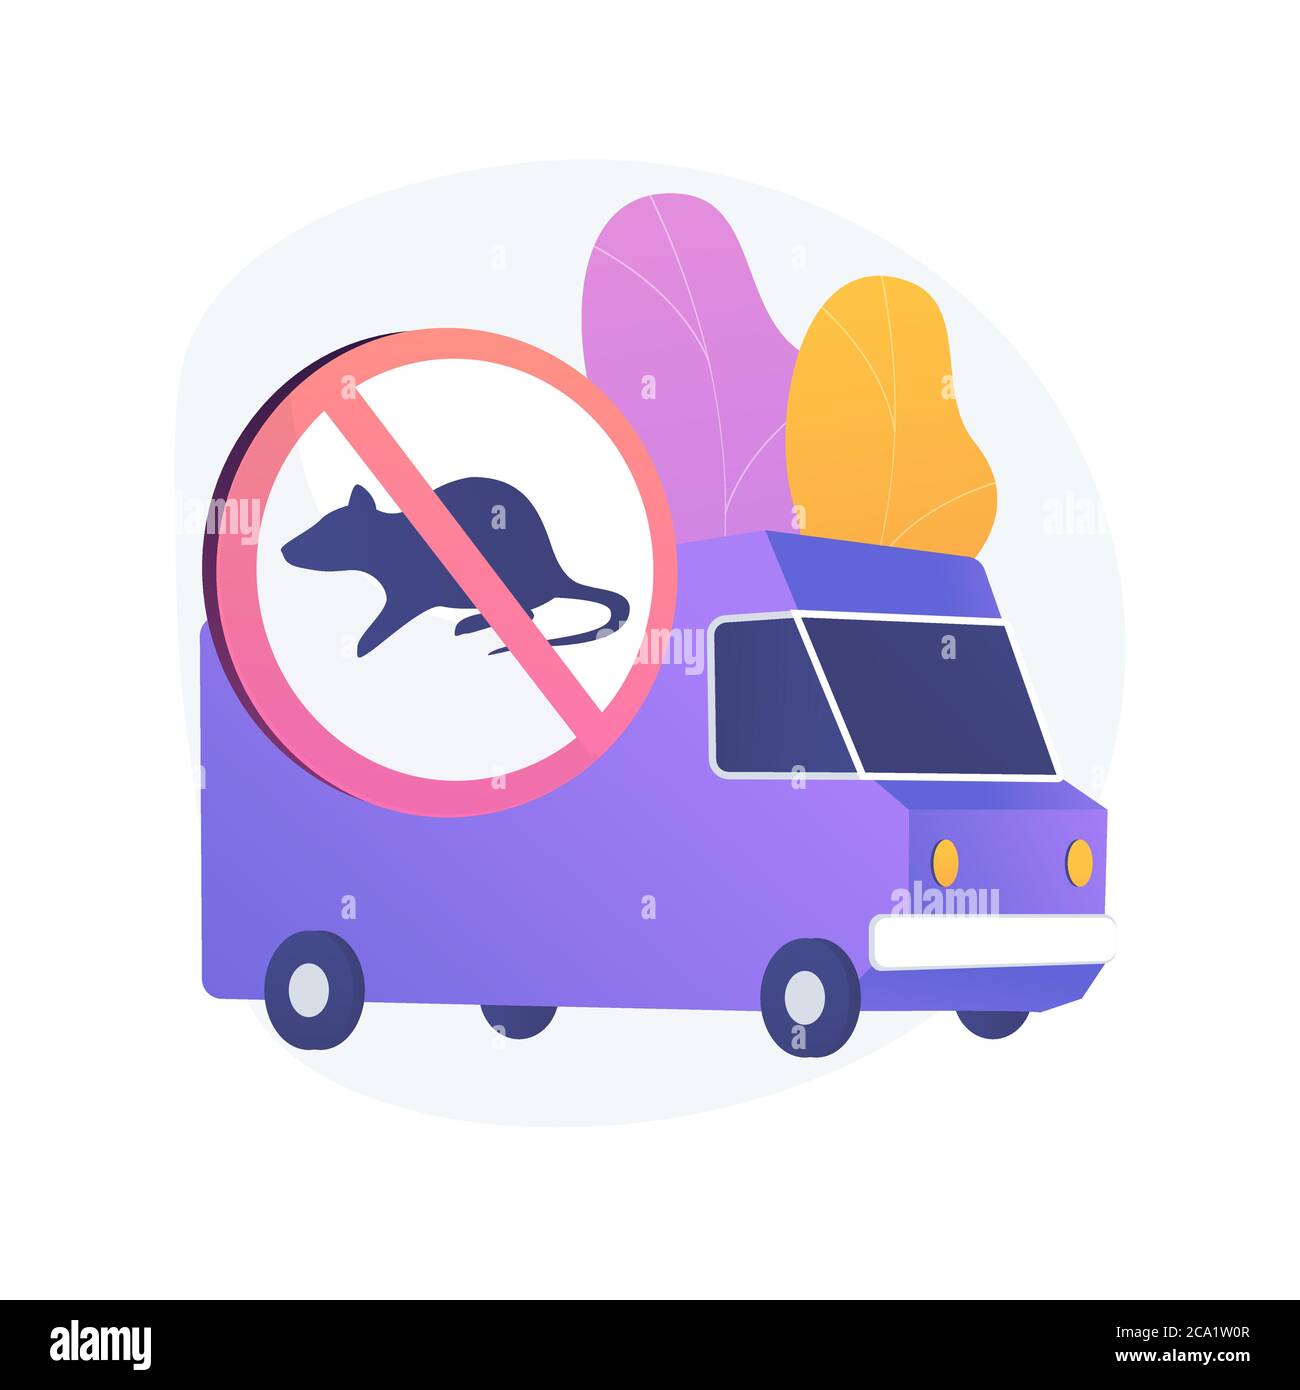 Rodents pest control service abstract concept vector illustration. Stock Vector